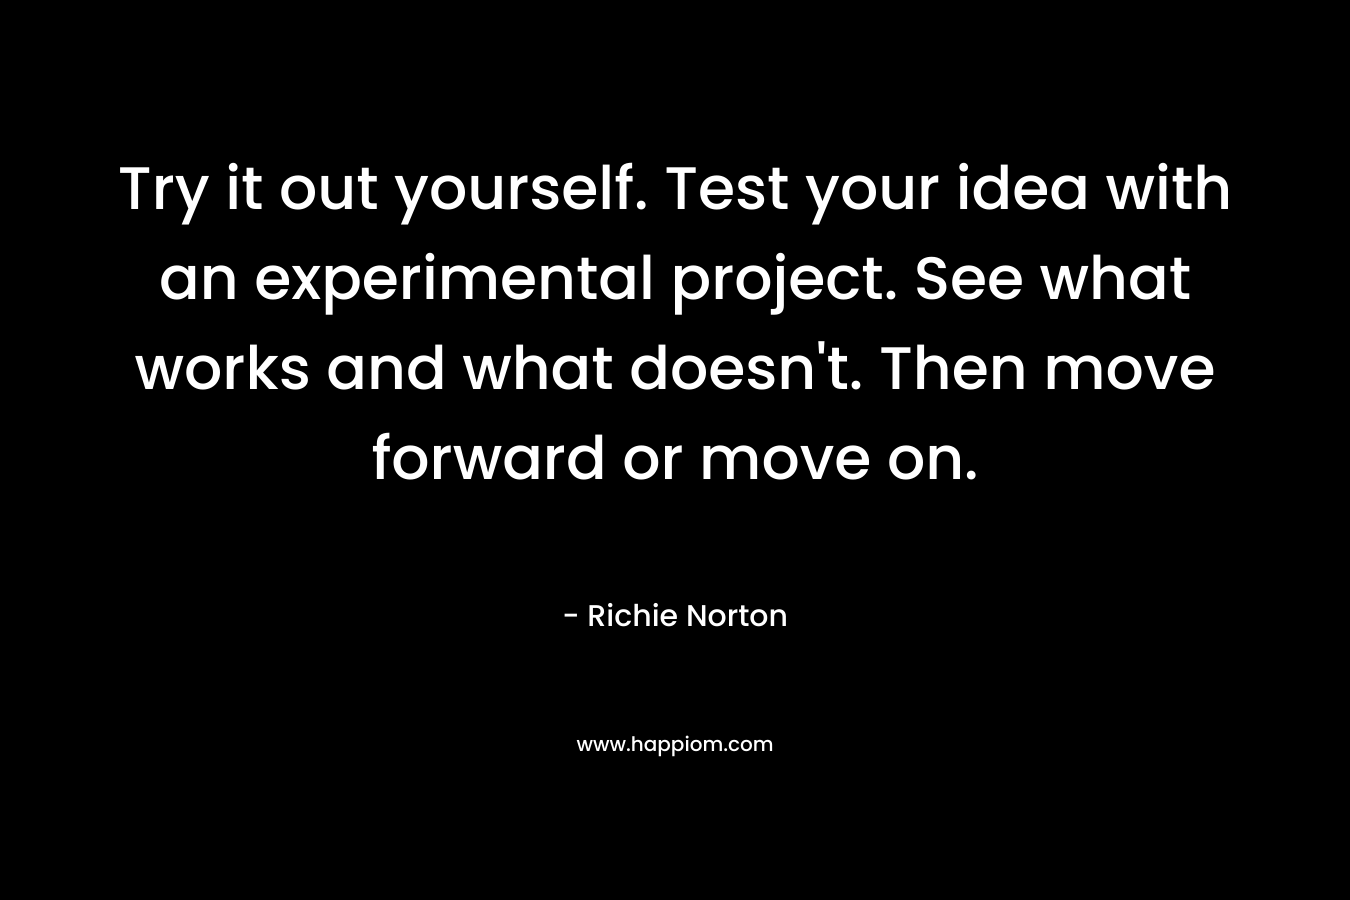 Try it out yourself. Test your idea with an experimental project. See what works and what doesn't. Then move forward or move on.